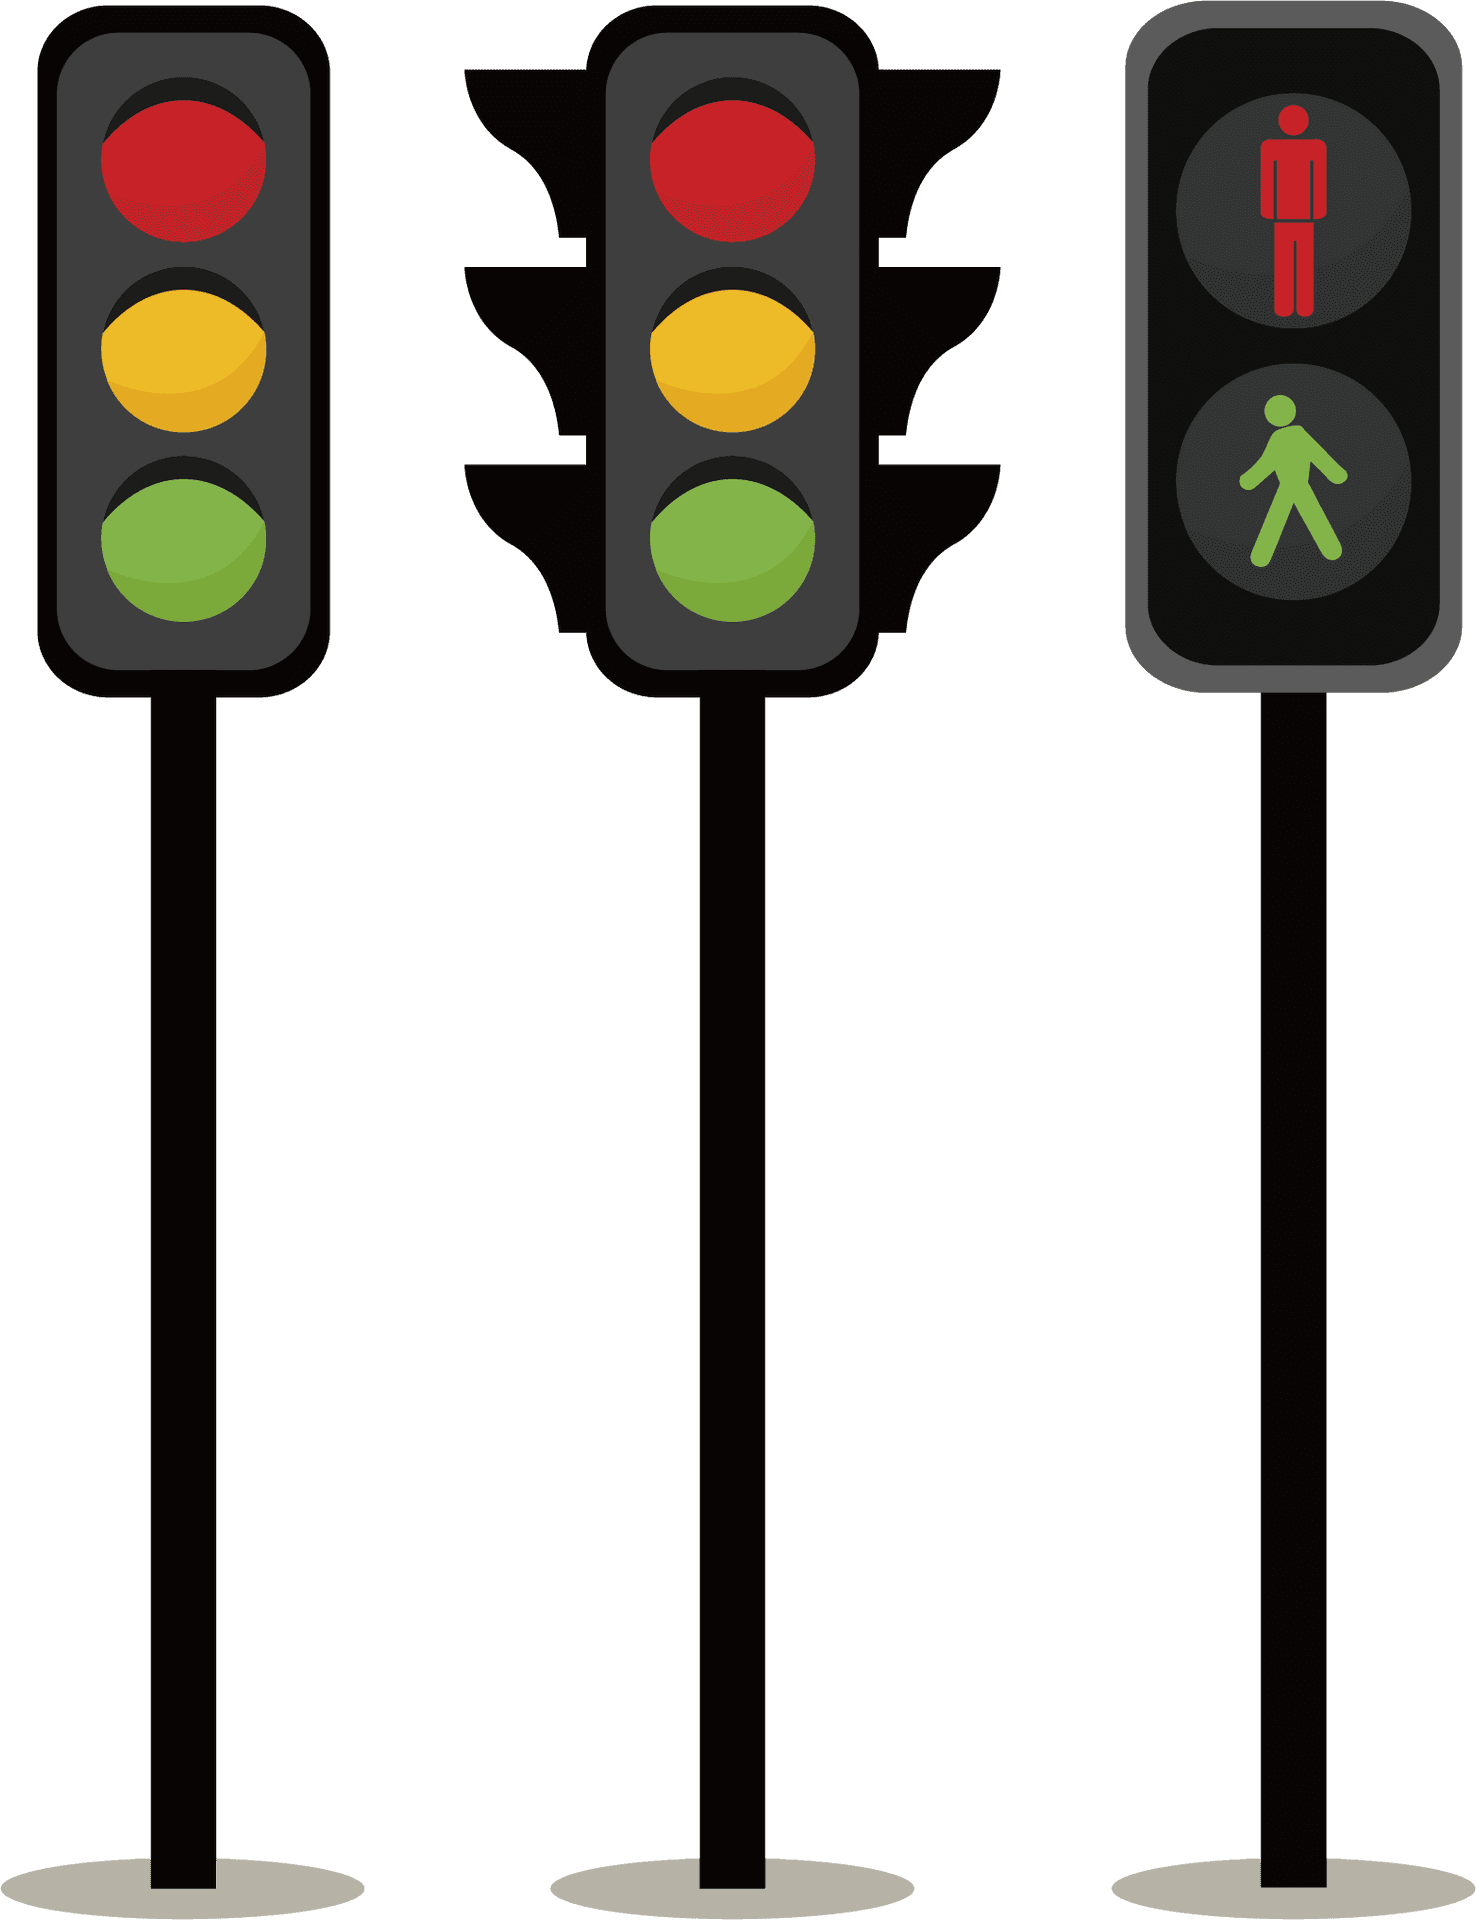 [100+] Traffic Light Png Images | Wallpapers.com